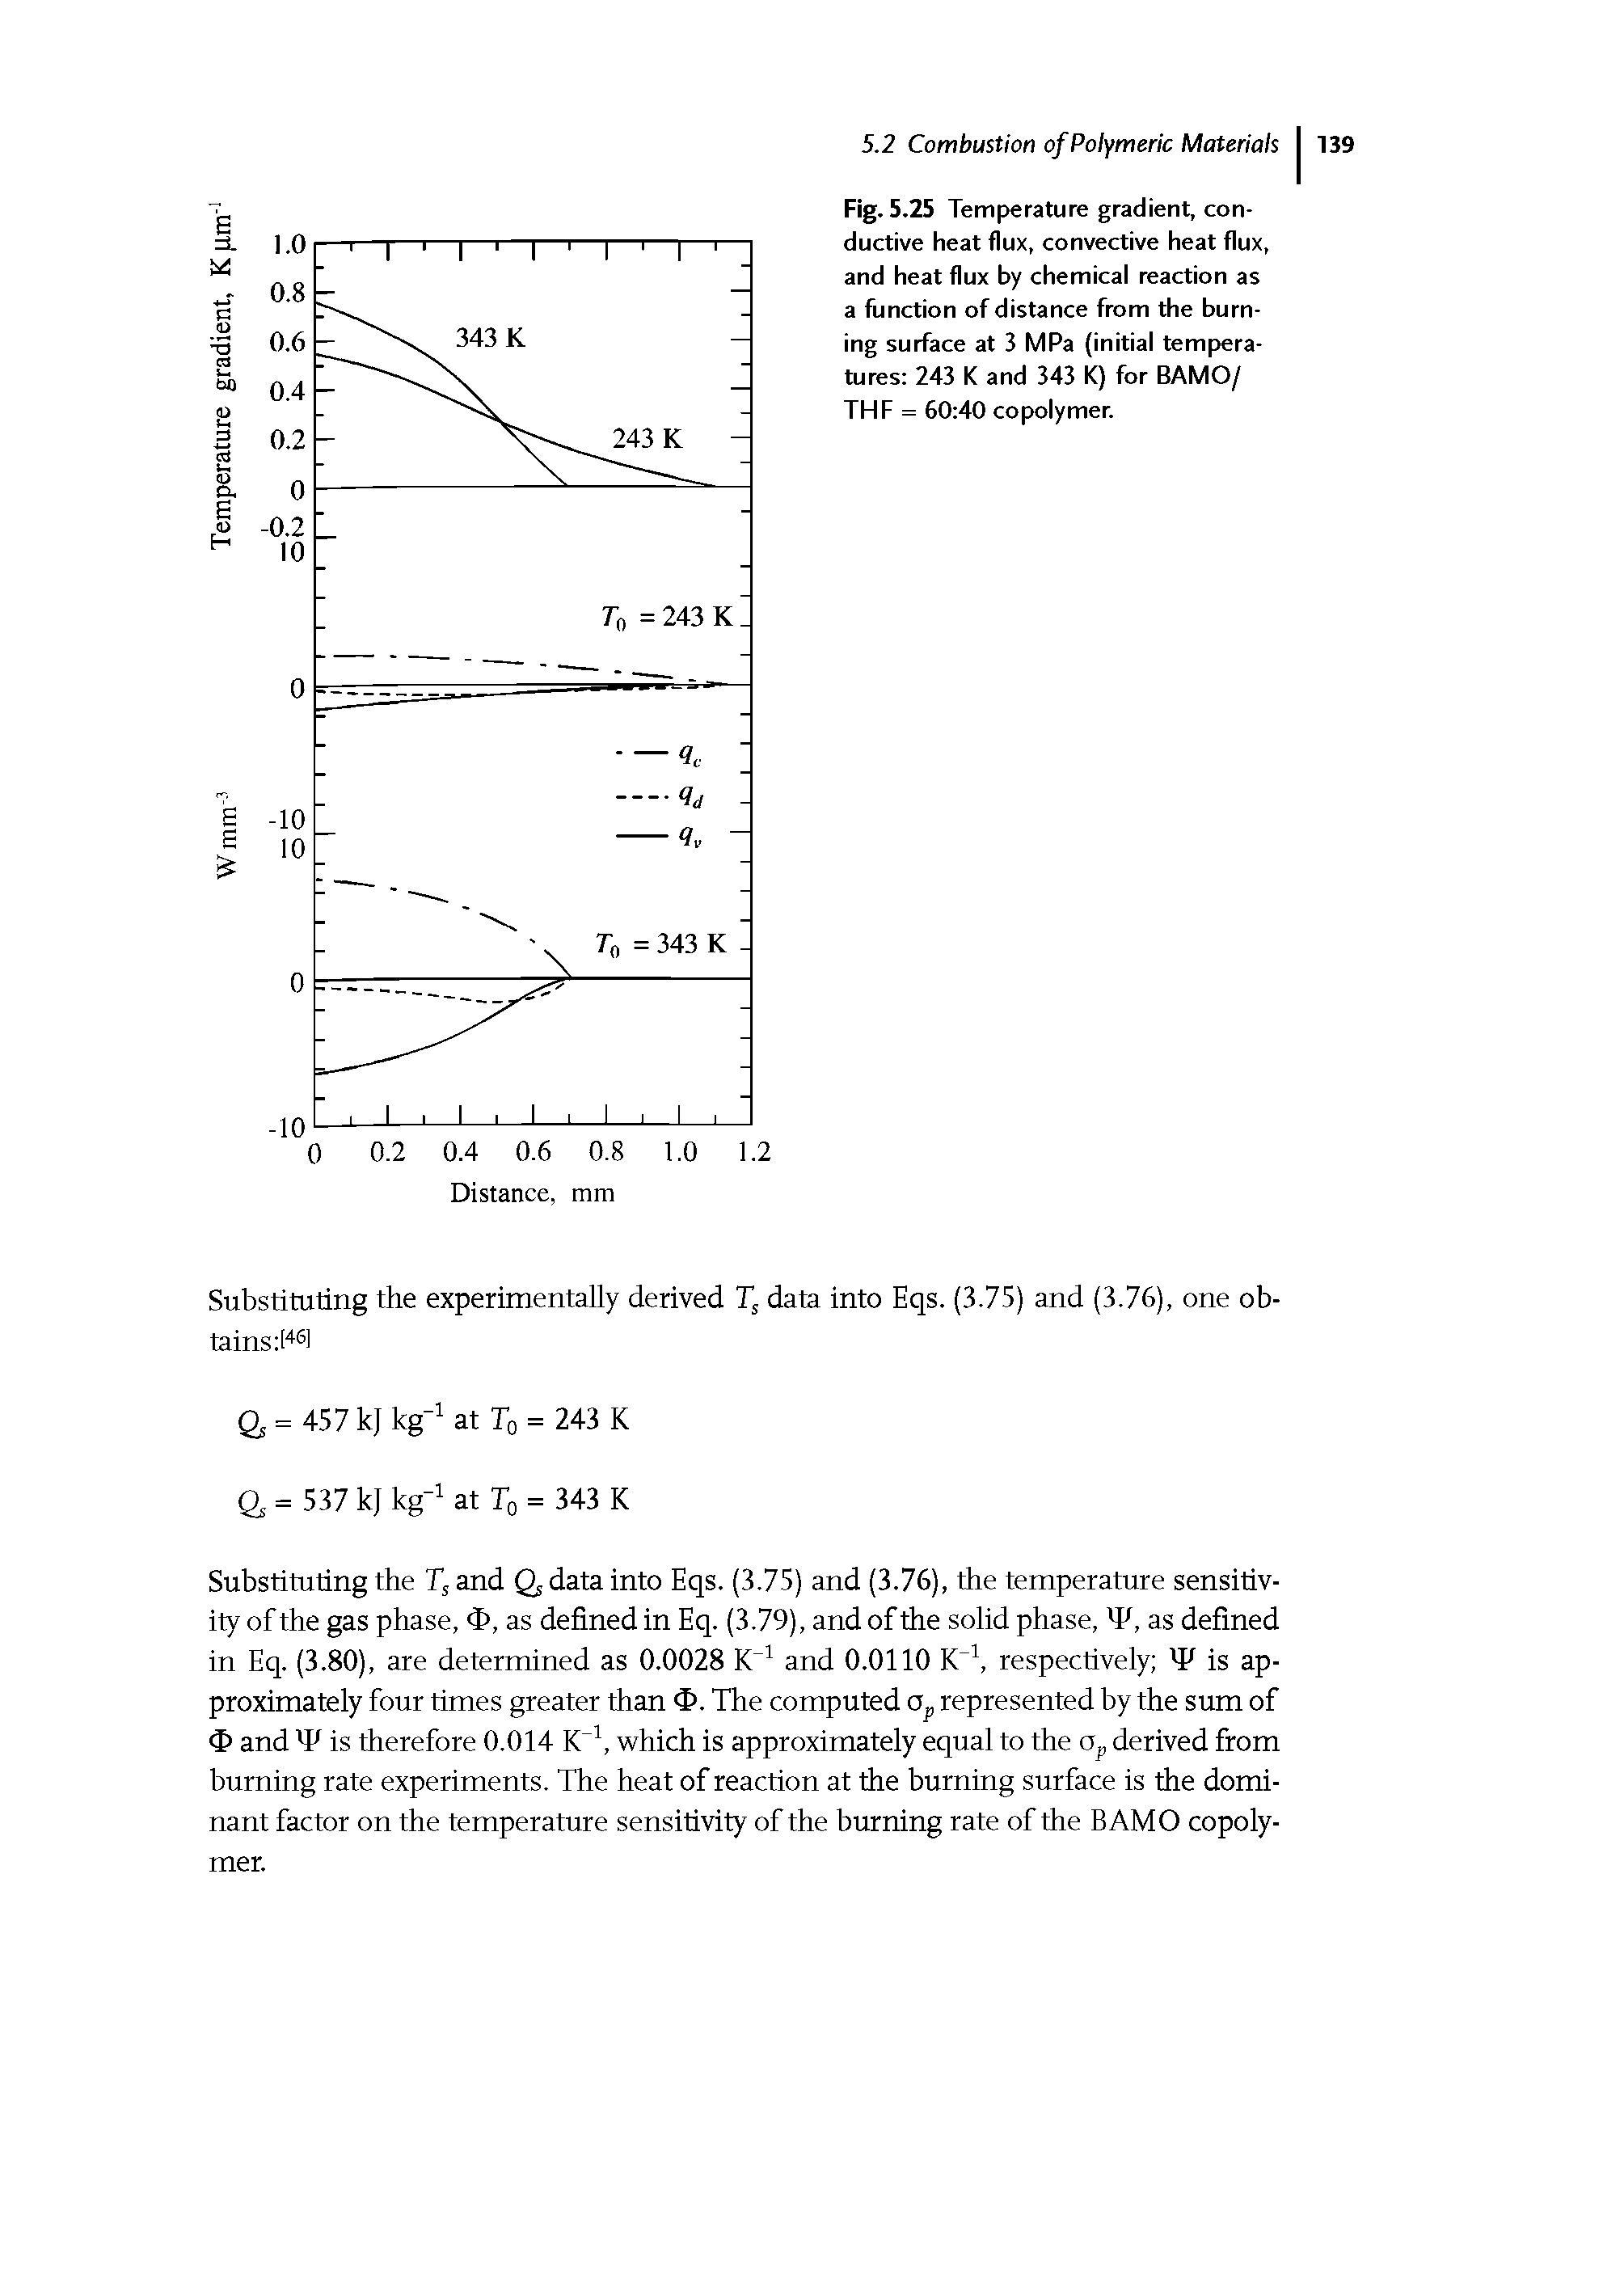 Fig. 5.25 Temperature gradient, conductive heat flux, convective heat flux, and heat flux by chemical reaction as a function of distance from the burning surface at 3 MPa (initial temperatures 243 K and 343 K) for BAMO/ THF = 60 40 copolymer.